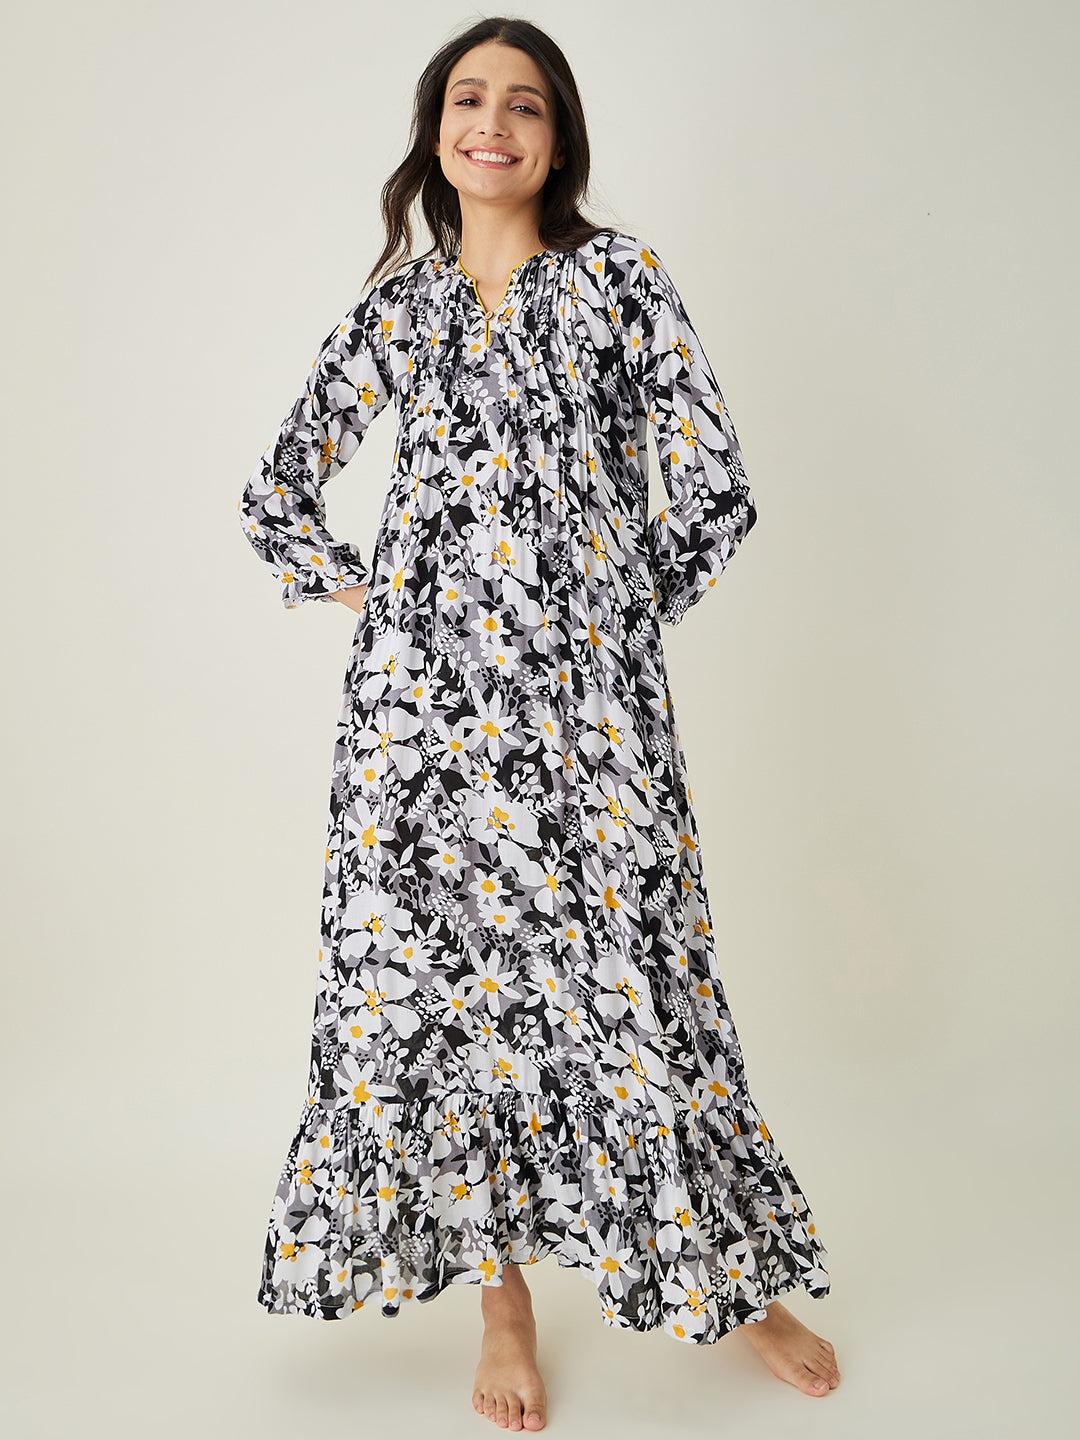 Women's Black and White Floral Printed Nightdress - The Kaftan Company